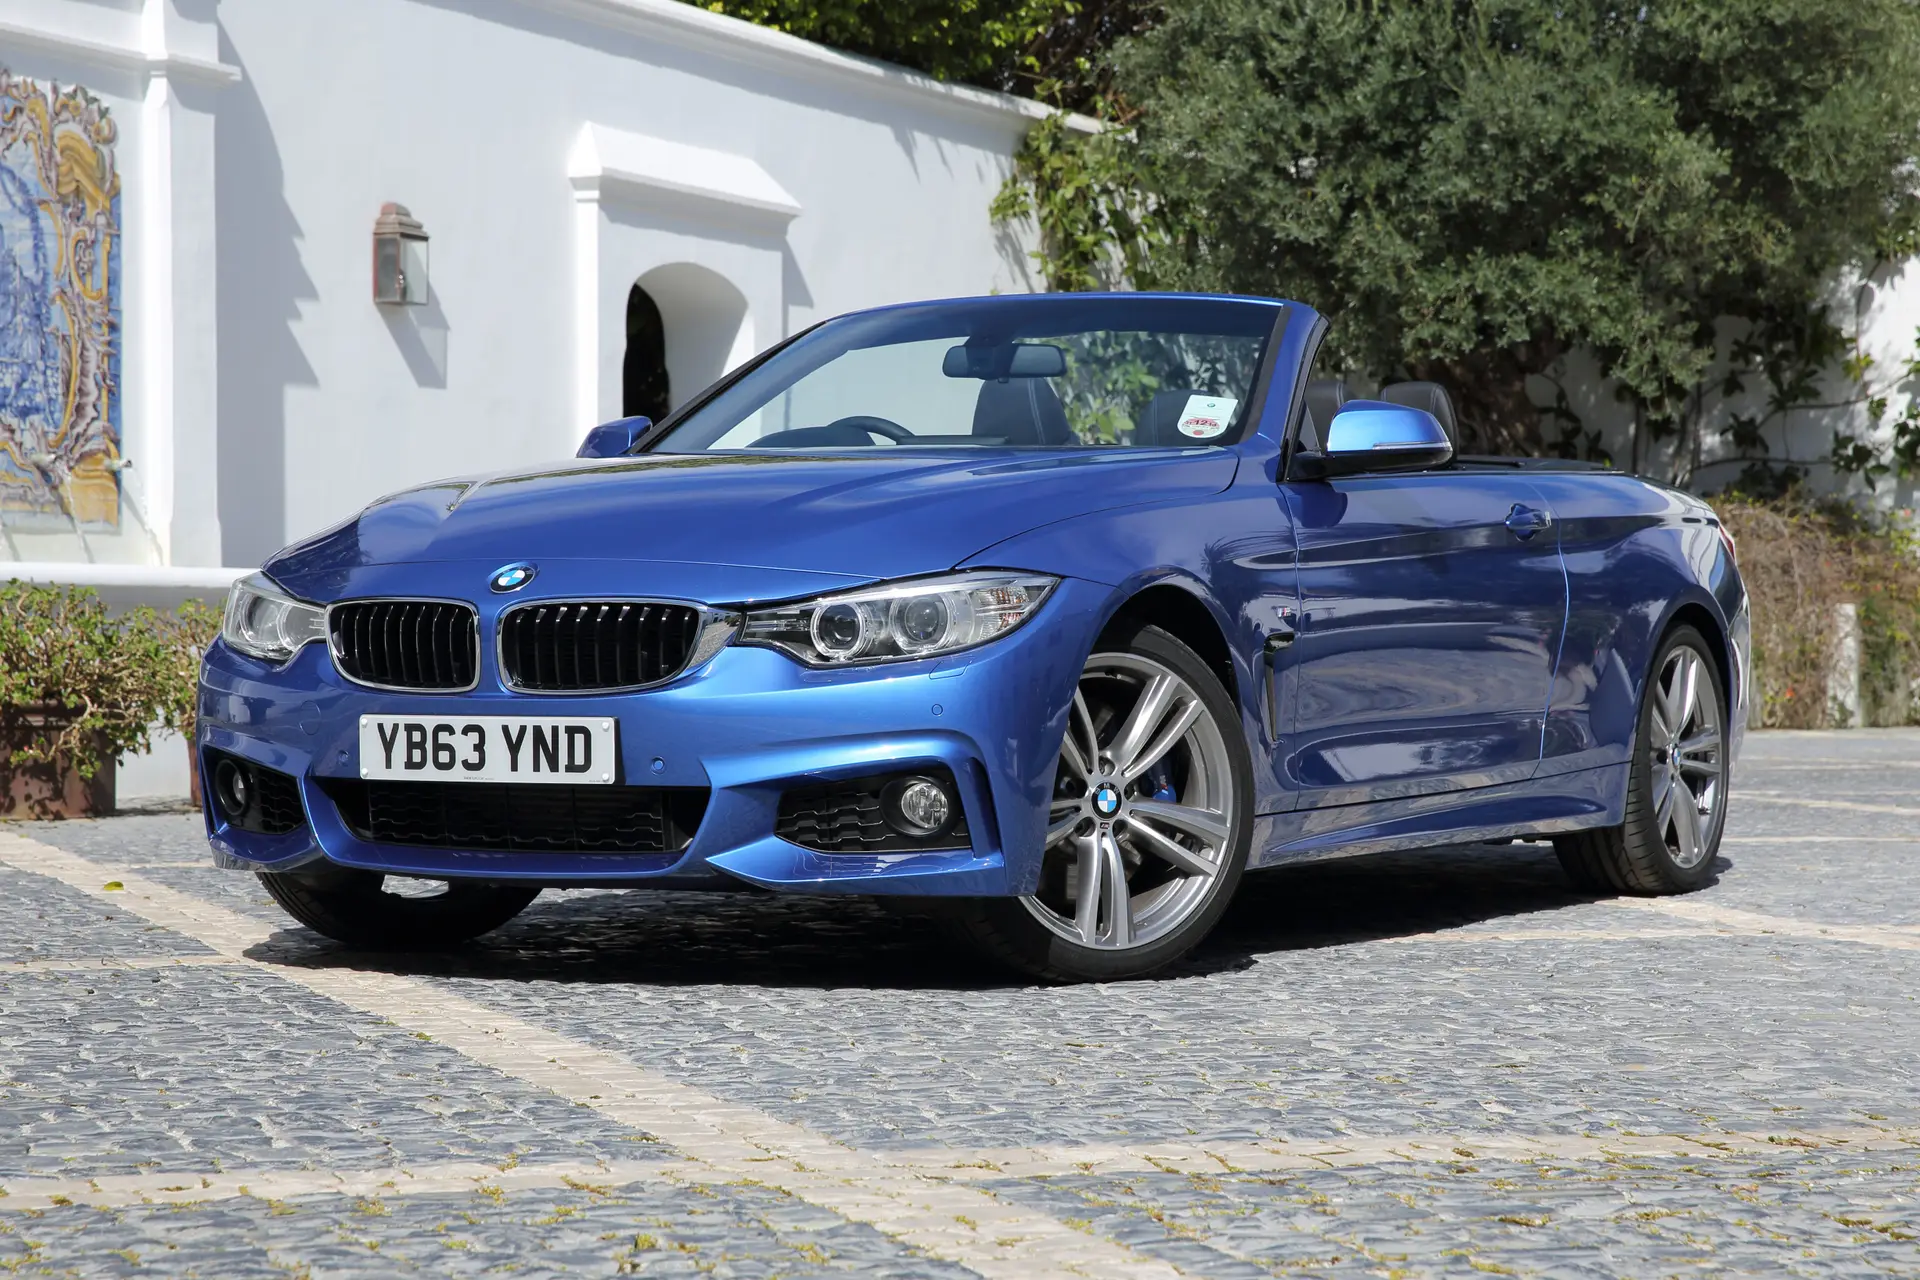 BMW 4 Series Convertible (2014-2020) Review: exterior front three quarter photo of the BMW 4 Series Convertible 